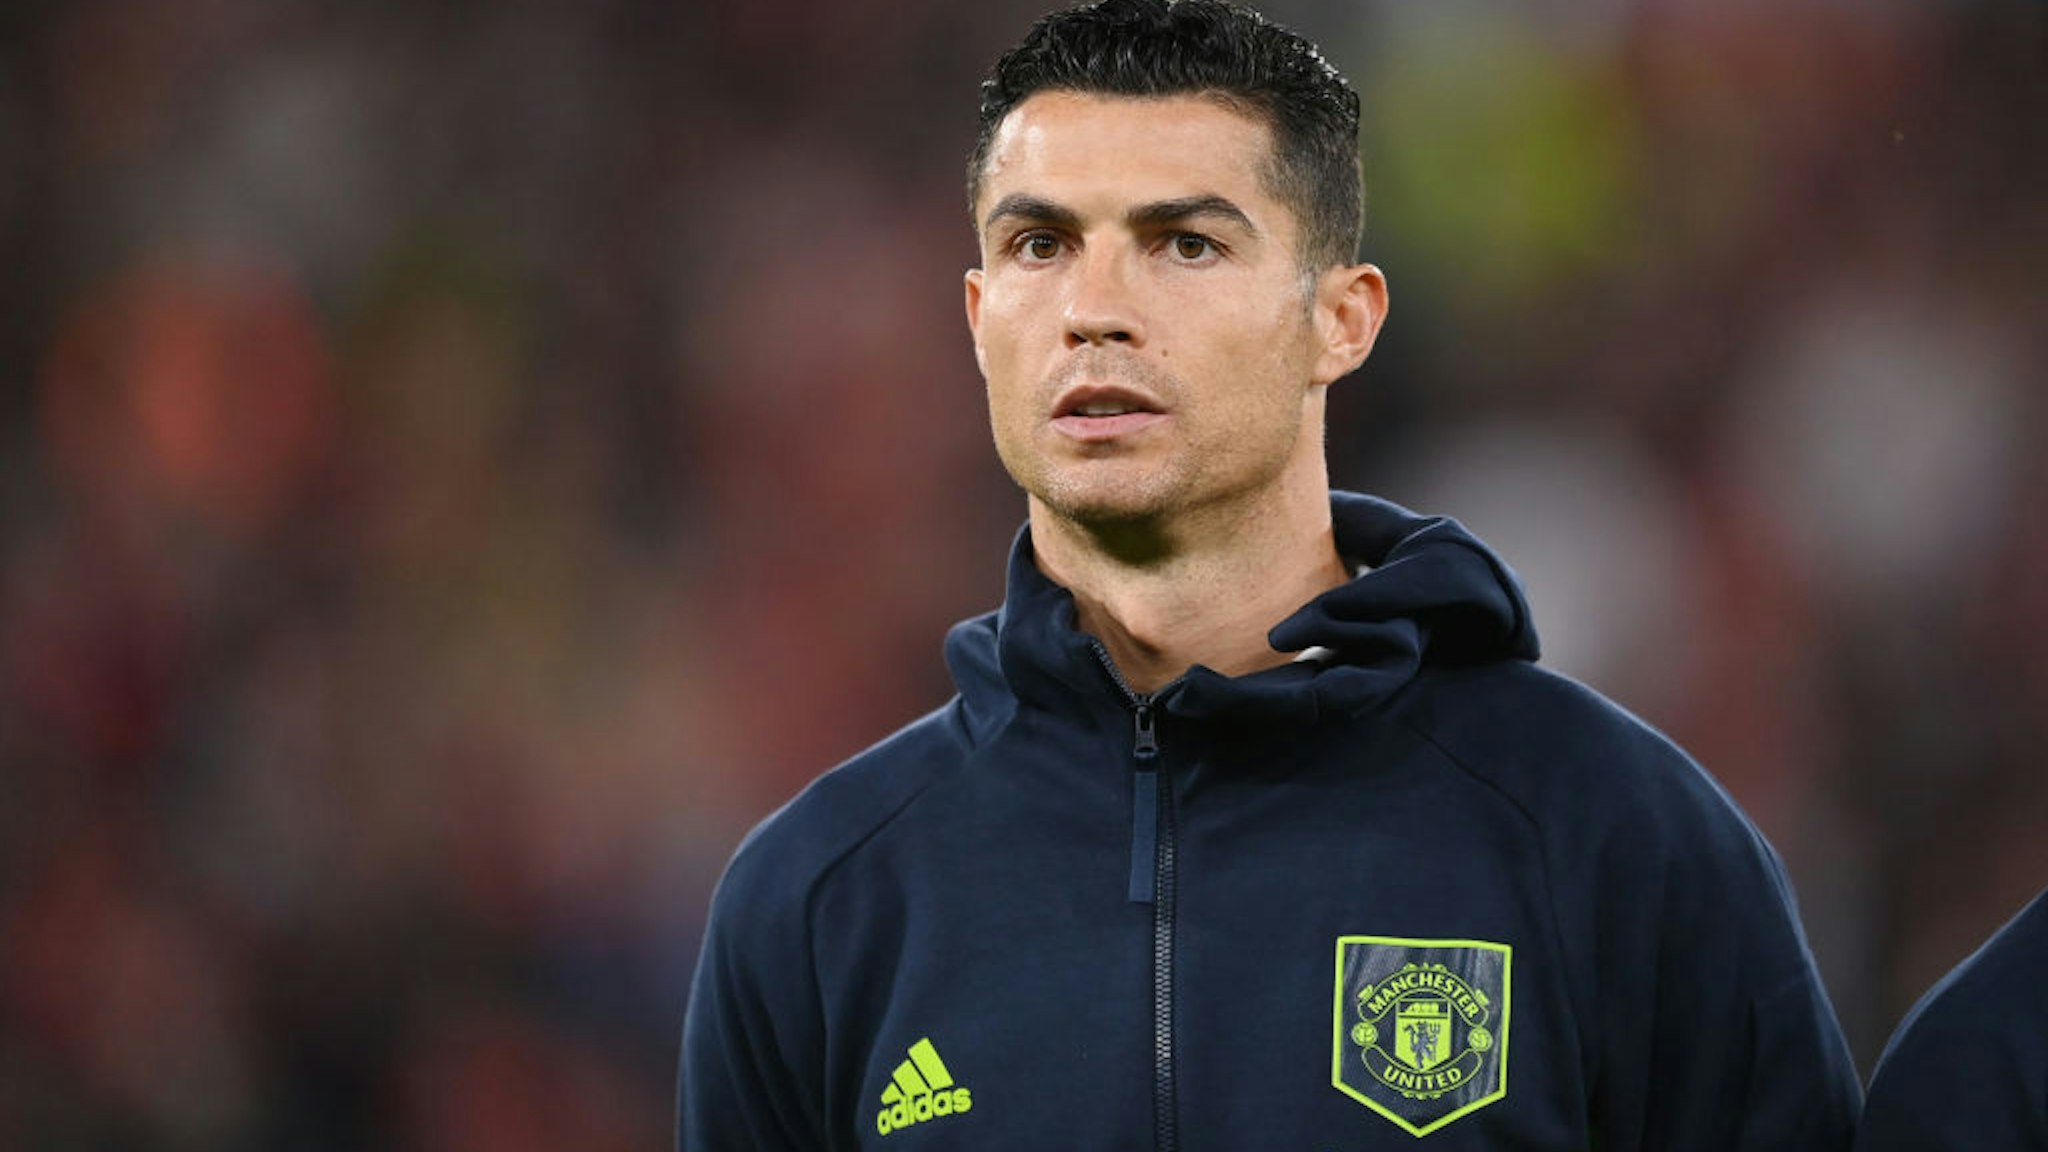 MANCHESTER, ENGLAND - SEPTEMBER 08: Cristiano Ronaldo of Manchester United looks on before the UEFA Europa League group E match between Manchester United and Real Sociedad at Old Trafford on September 08, 2022 in Manchester, England. (Photo by Michael Regan/Getty Images)